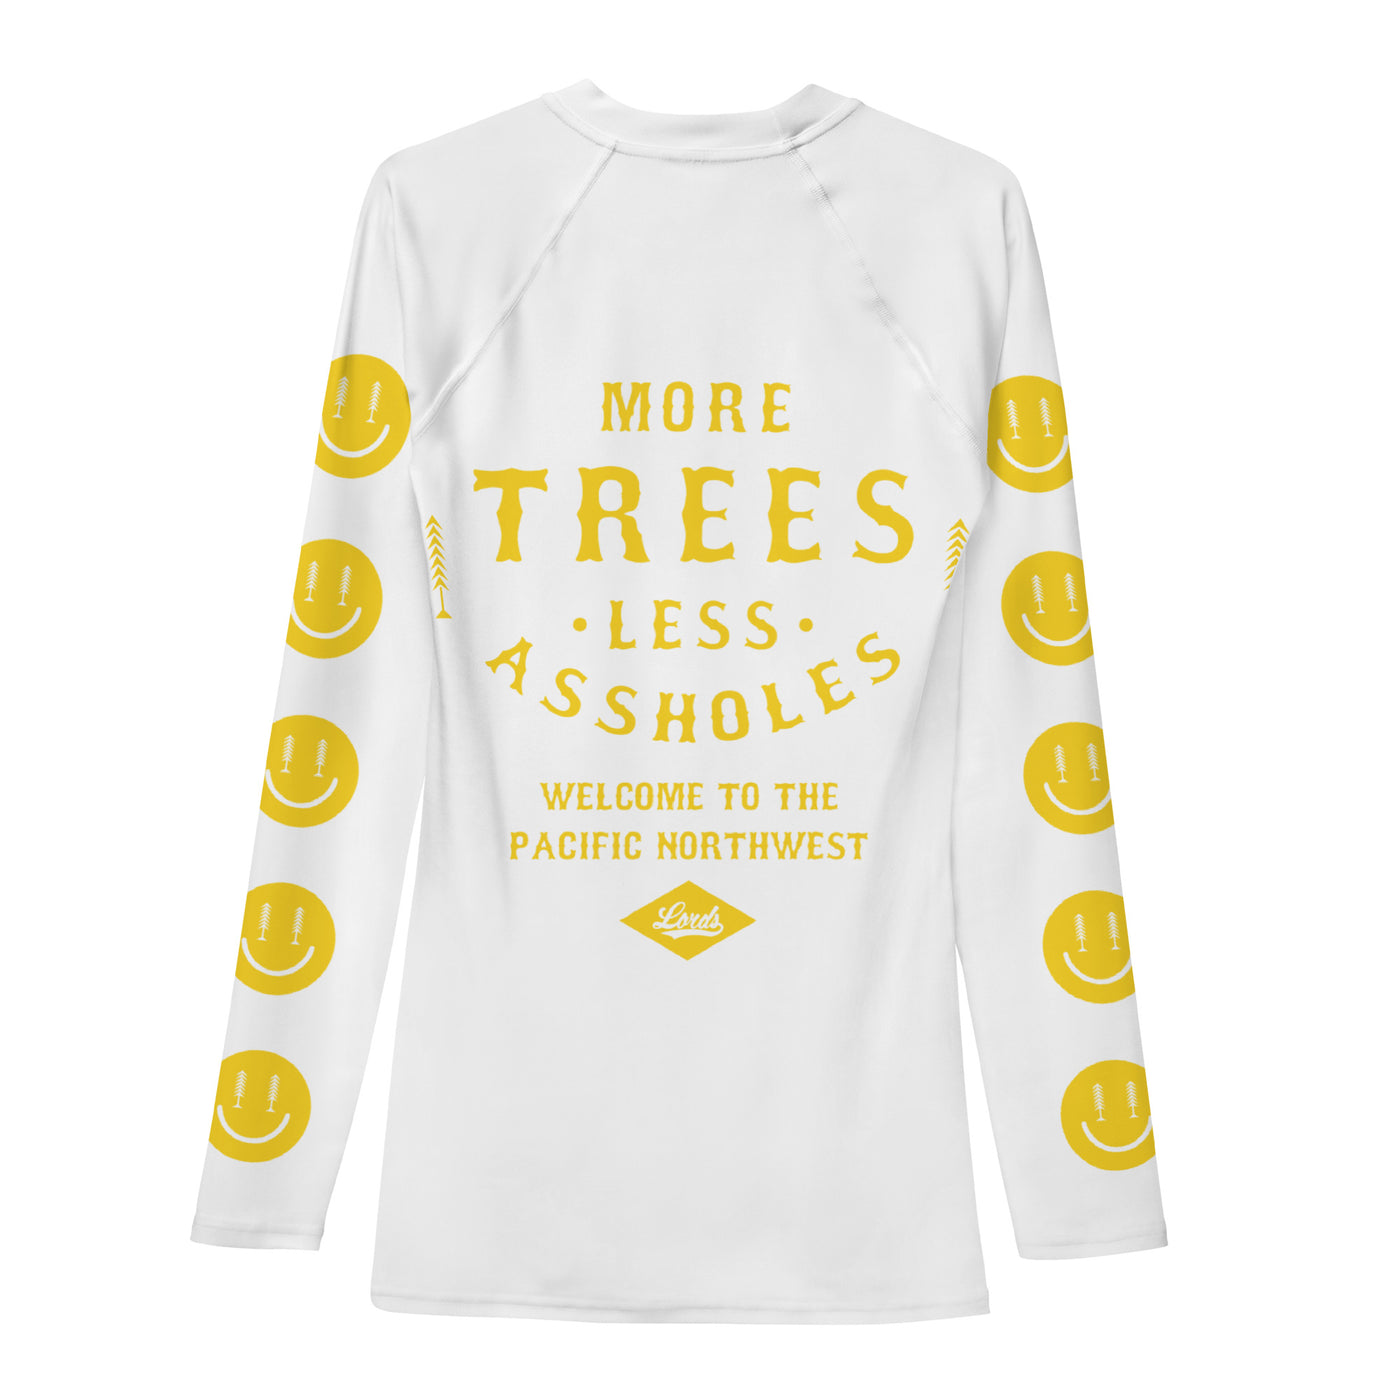 Lords x More Trees Wind Guard Jersey - White/Yellow